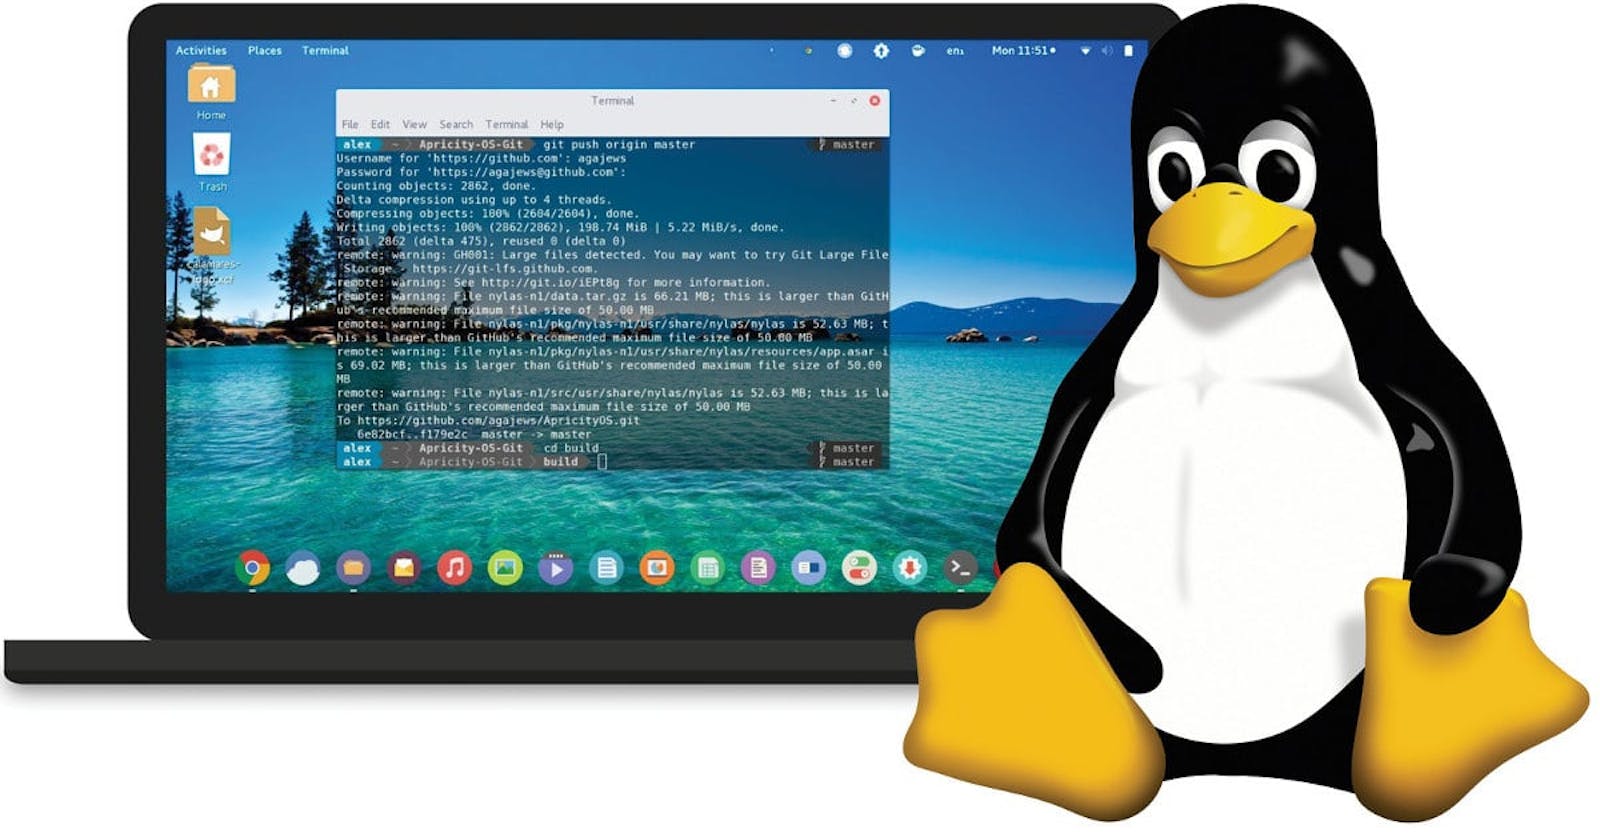 Getting Started with Linux